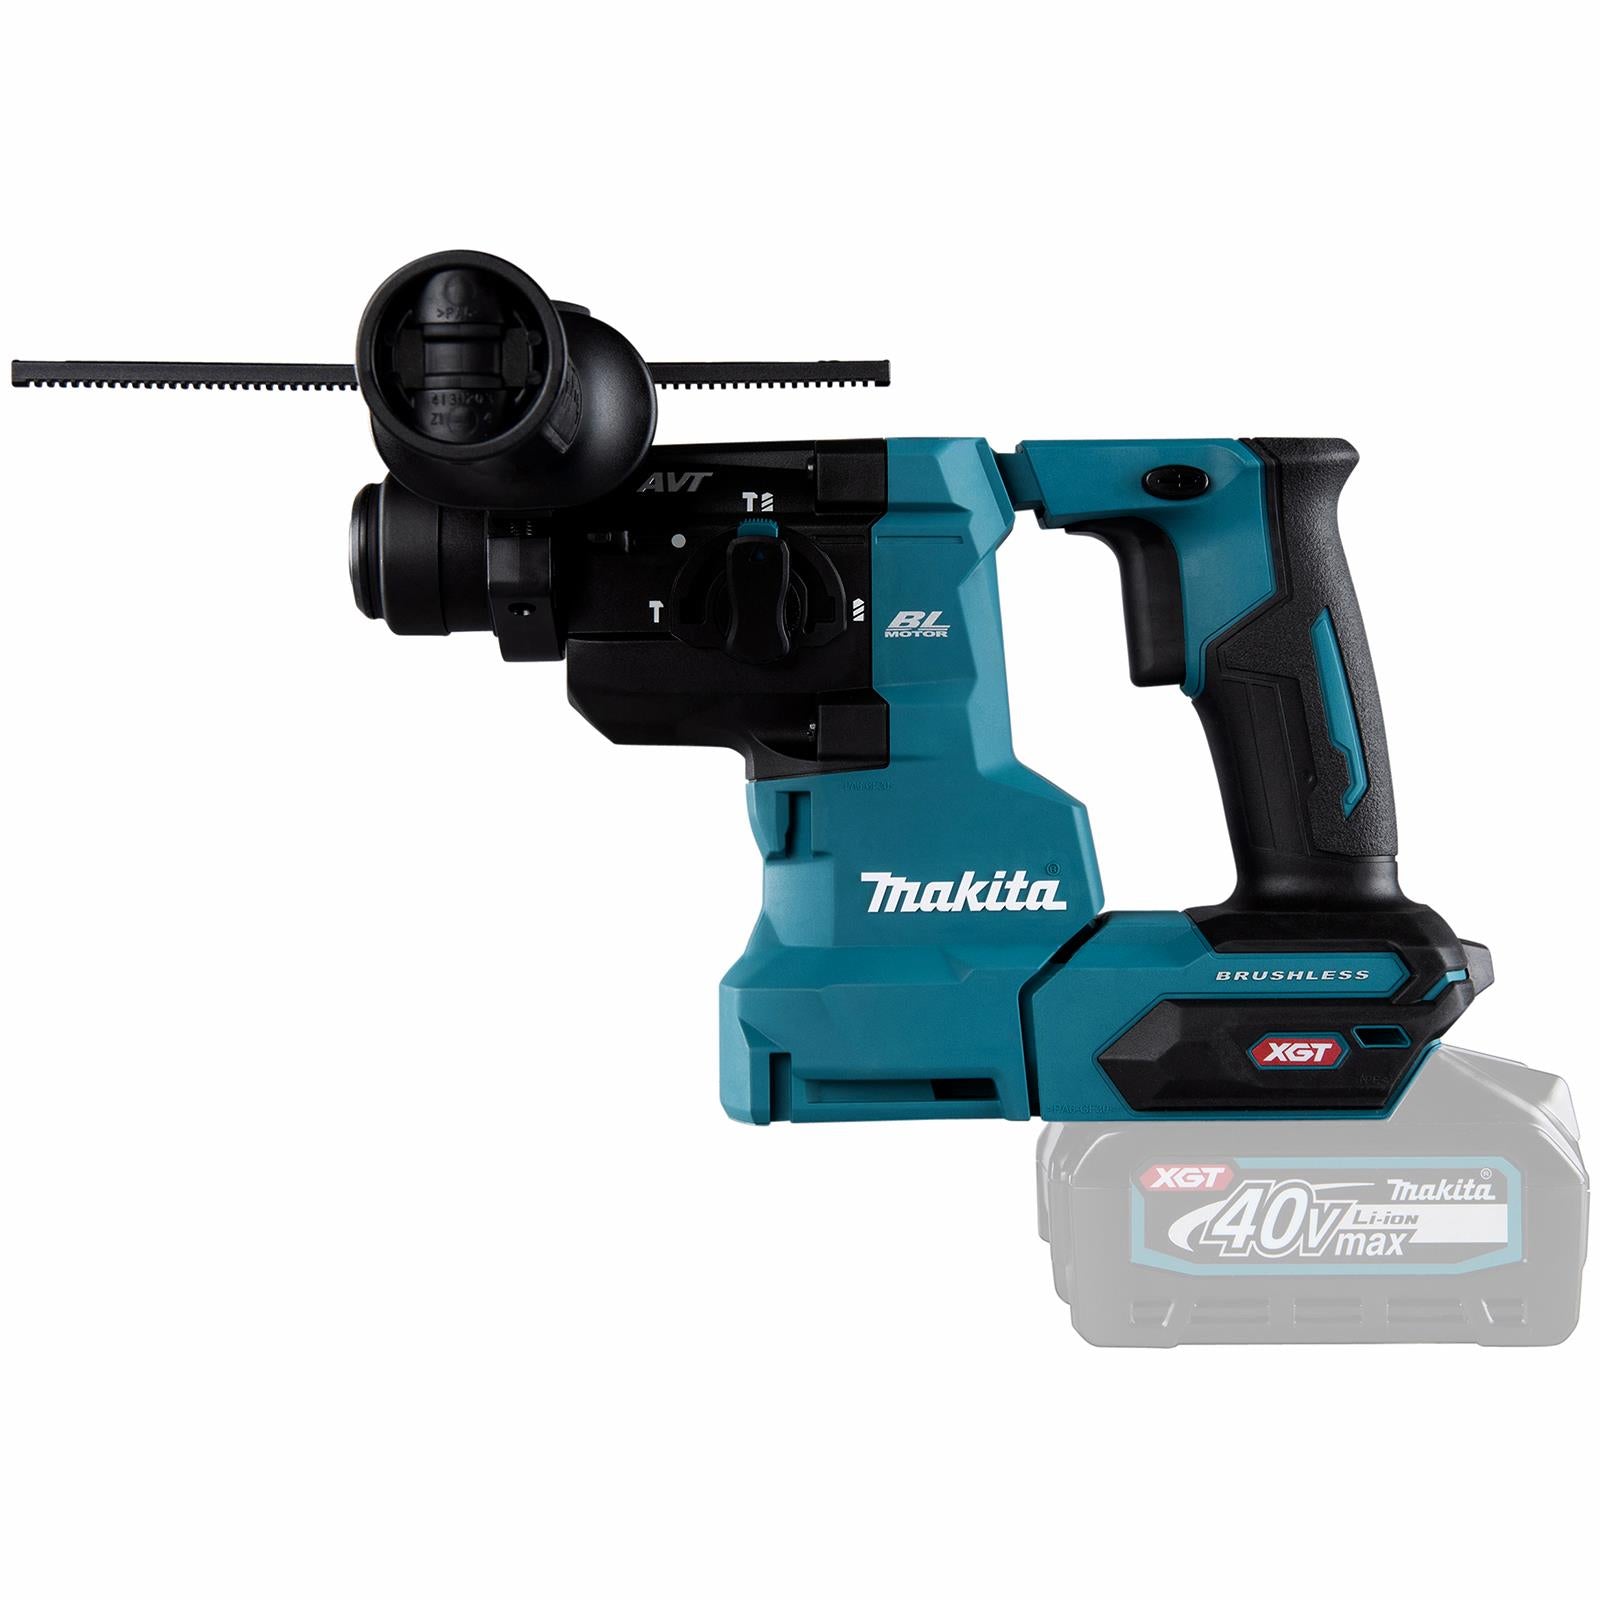 Makita Rotary Hammer Drill SDS Plus 40V XGT Brushless Cordless in Makpac Case HR010GZ01 Body Only